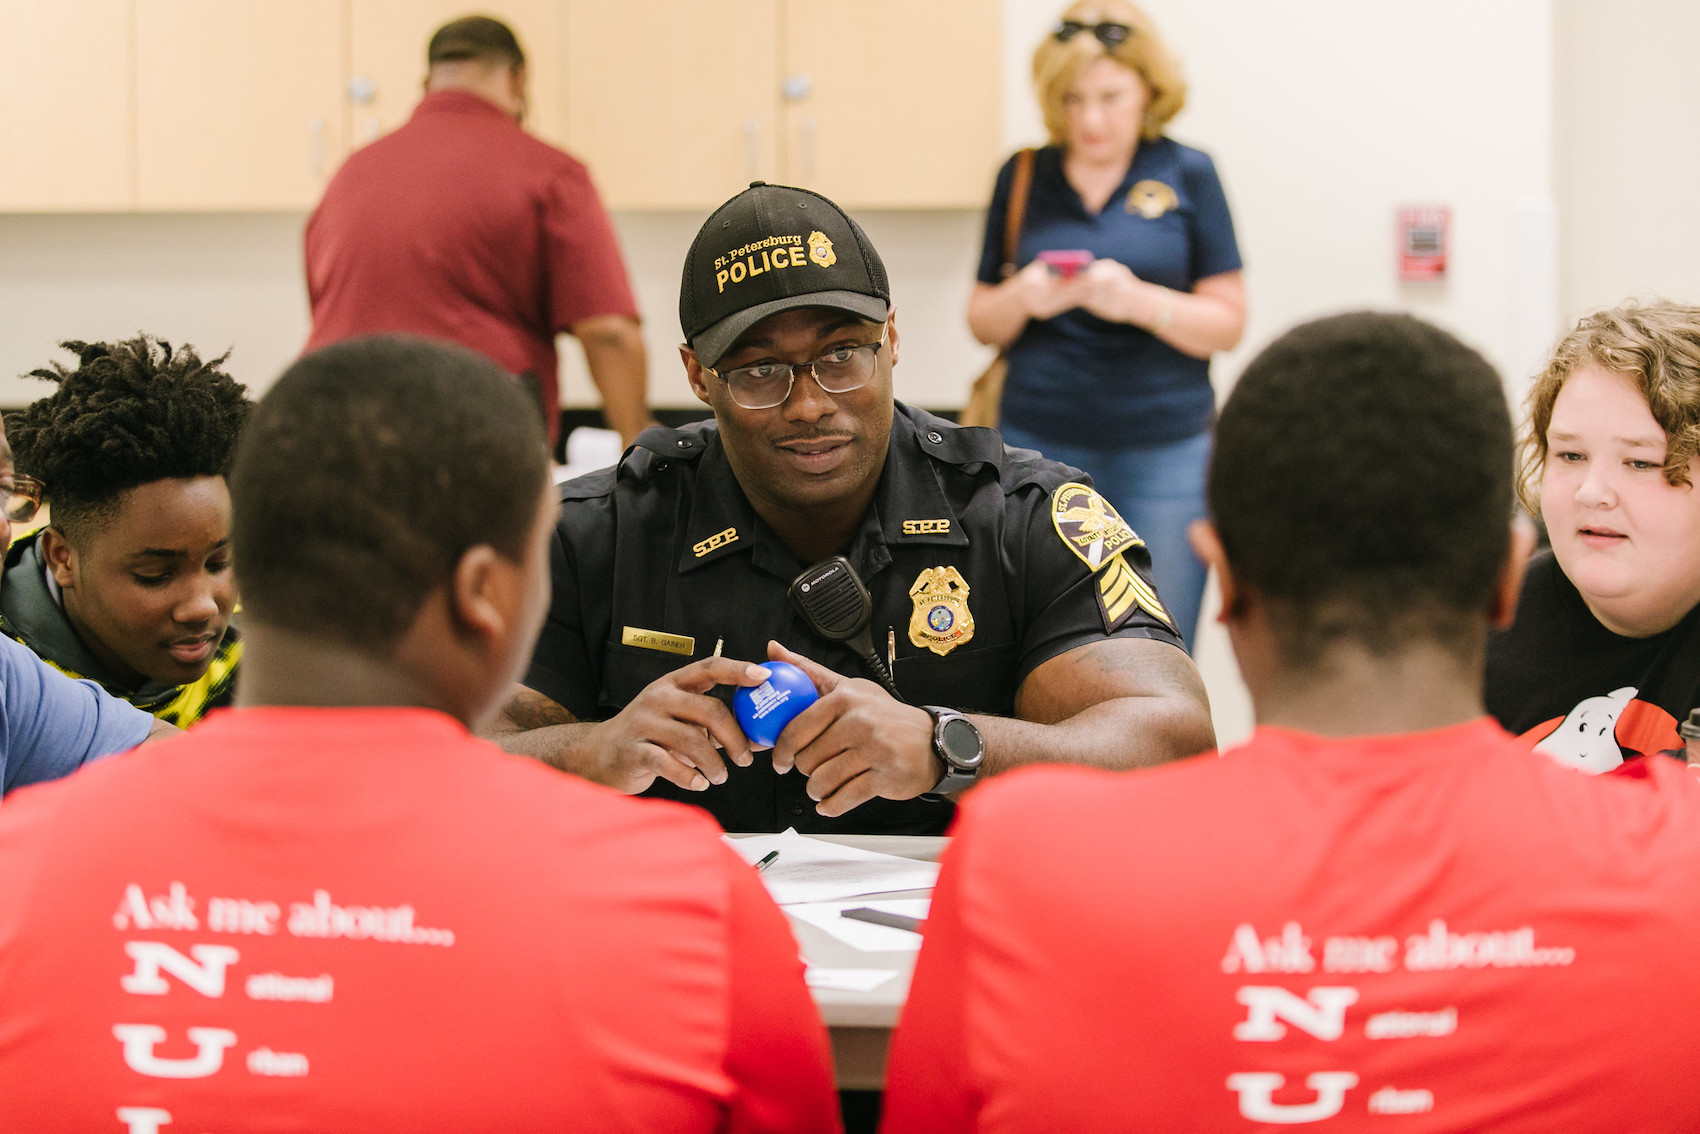 Police man talking to youth at discussion table